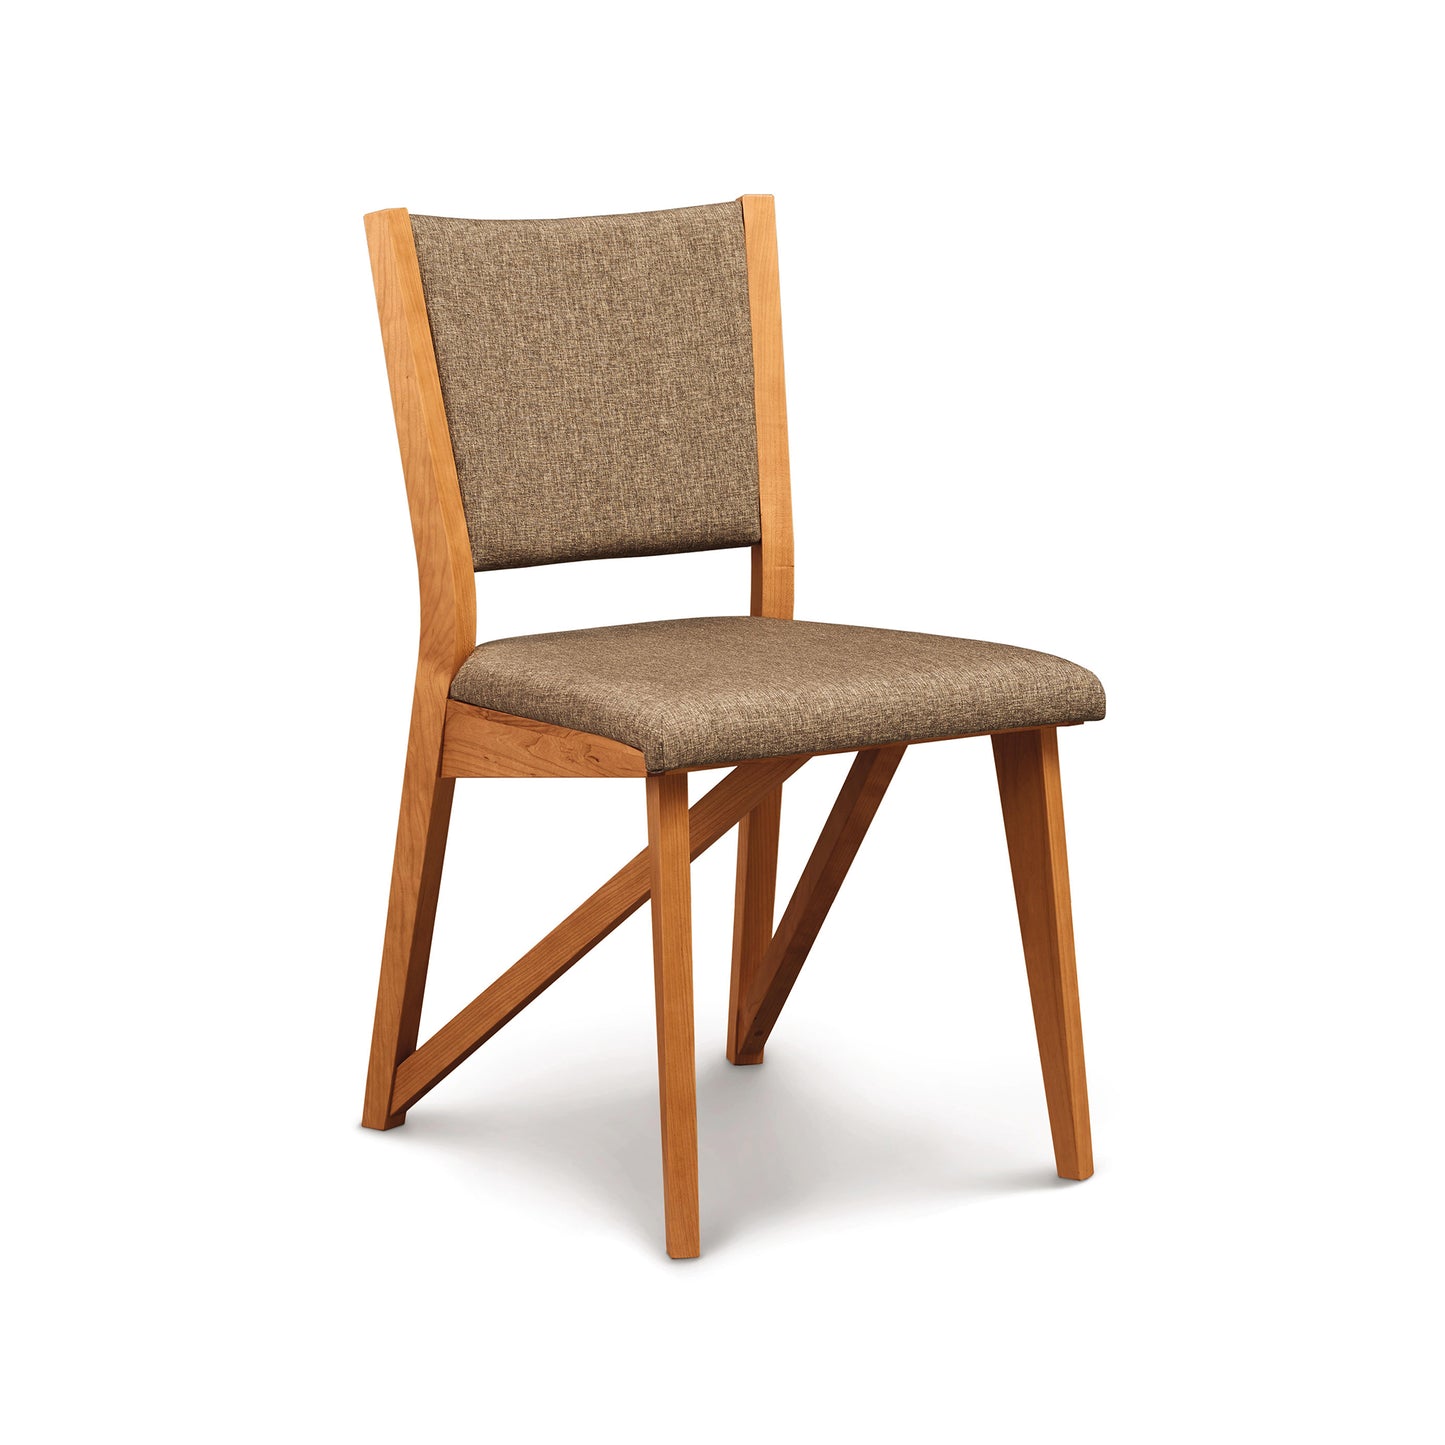 A modern style Exeter Chair from the Copeland Furniture Collection with a tan upholstered seat and backrest, isolated on a white background.